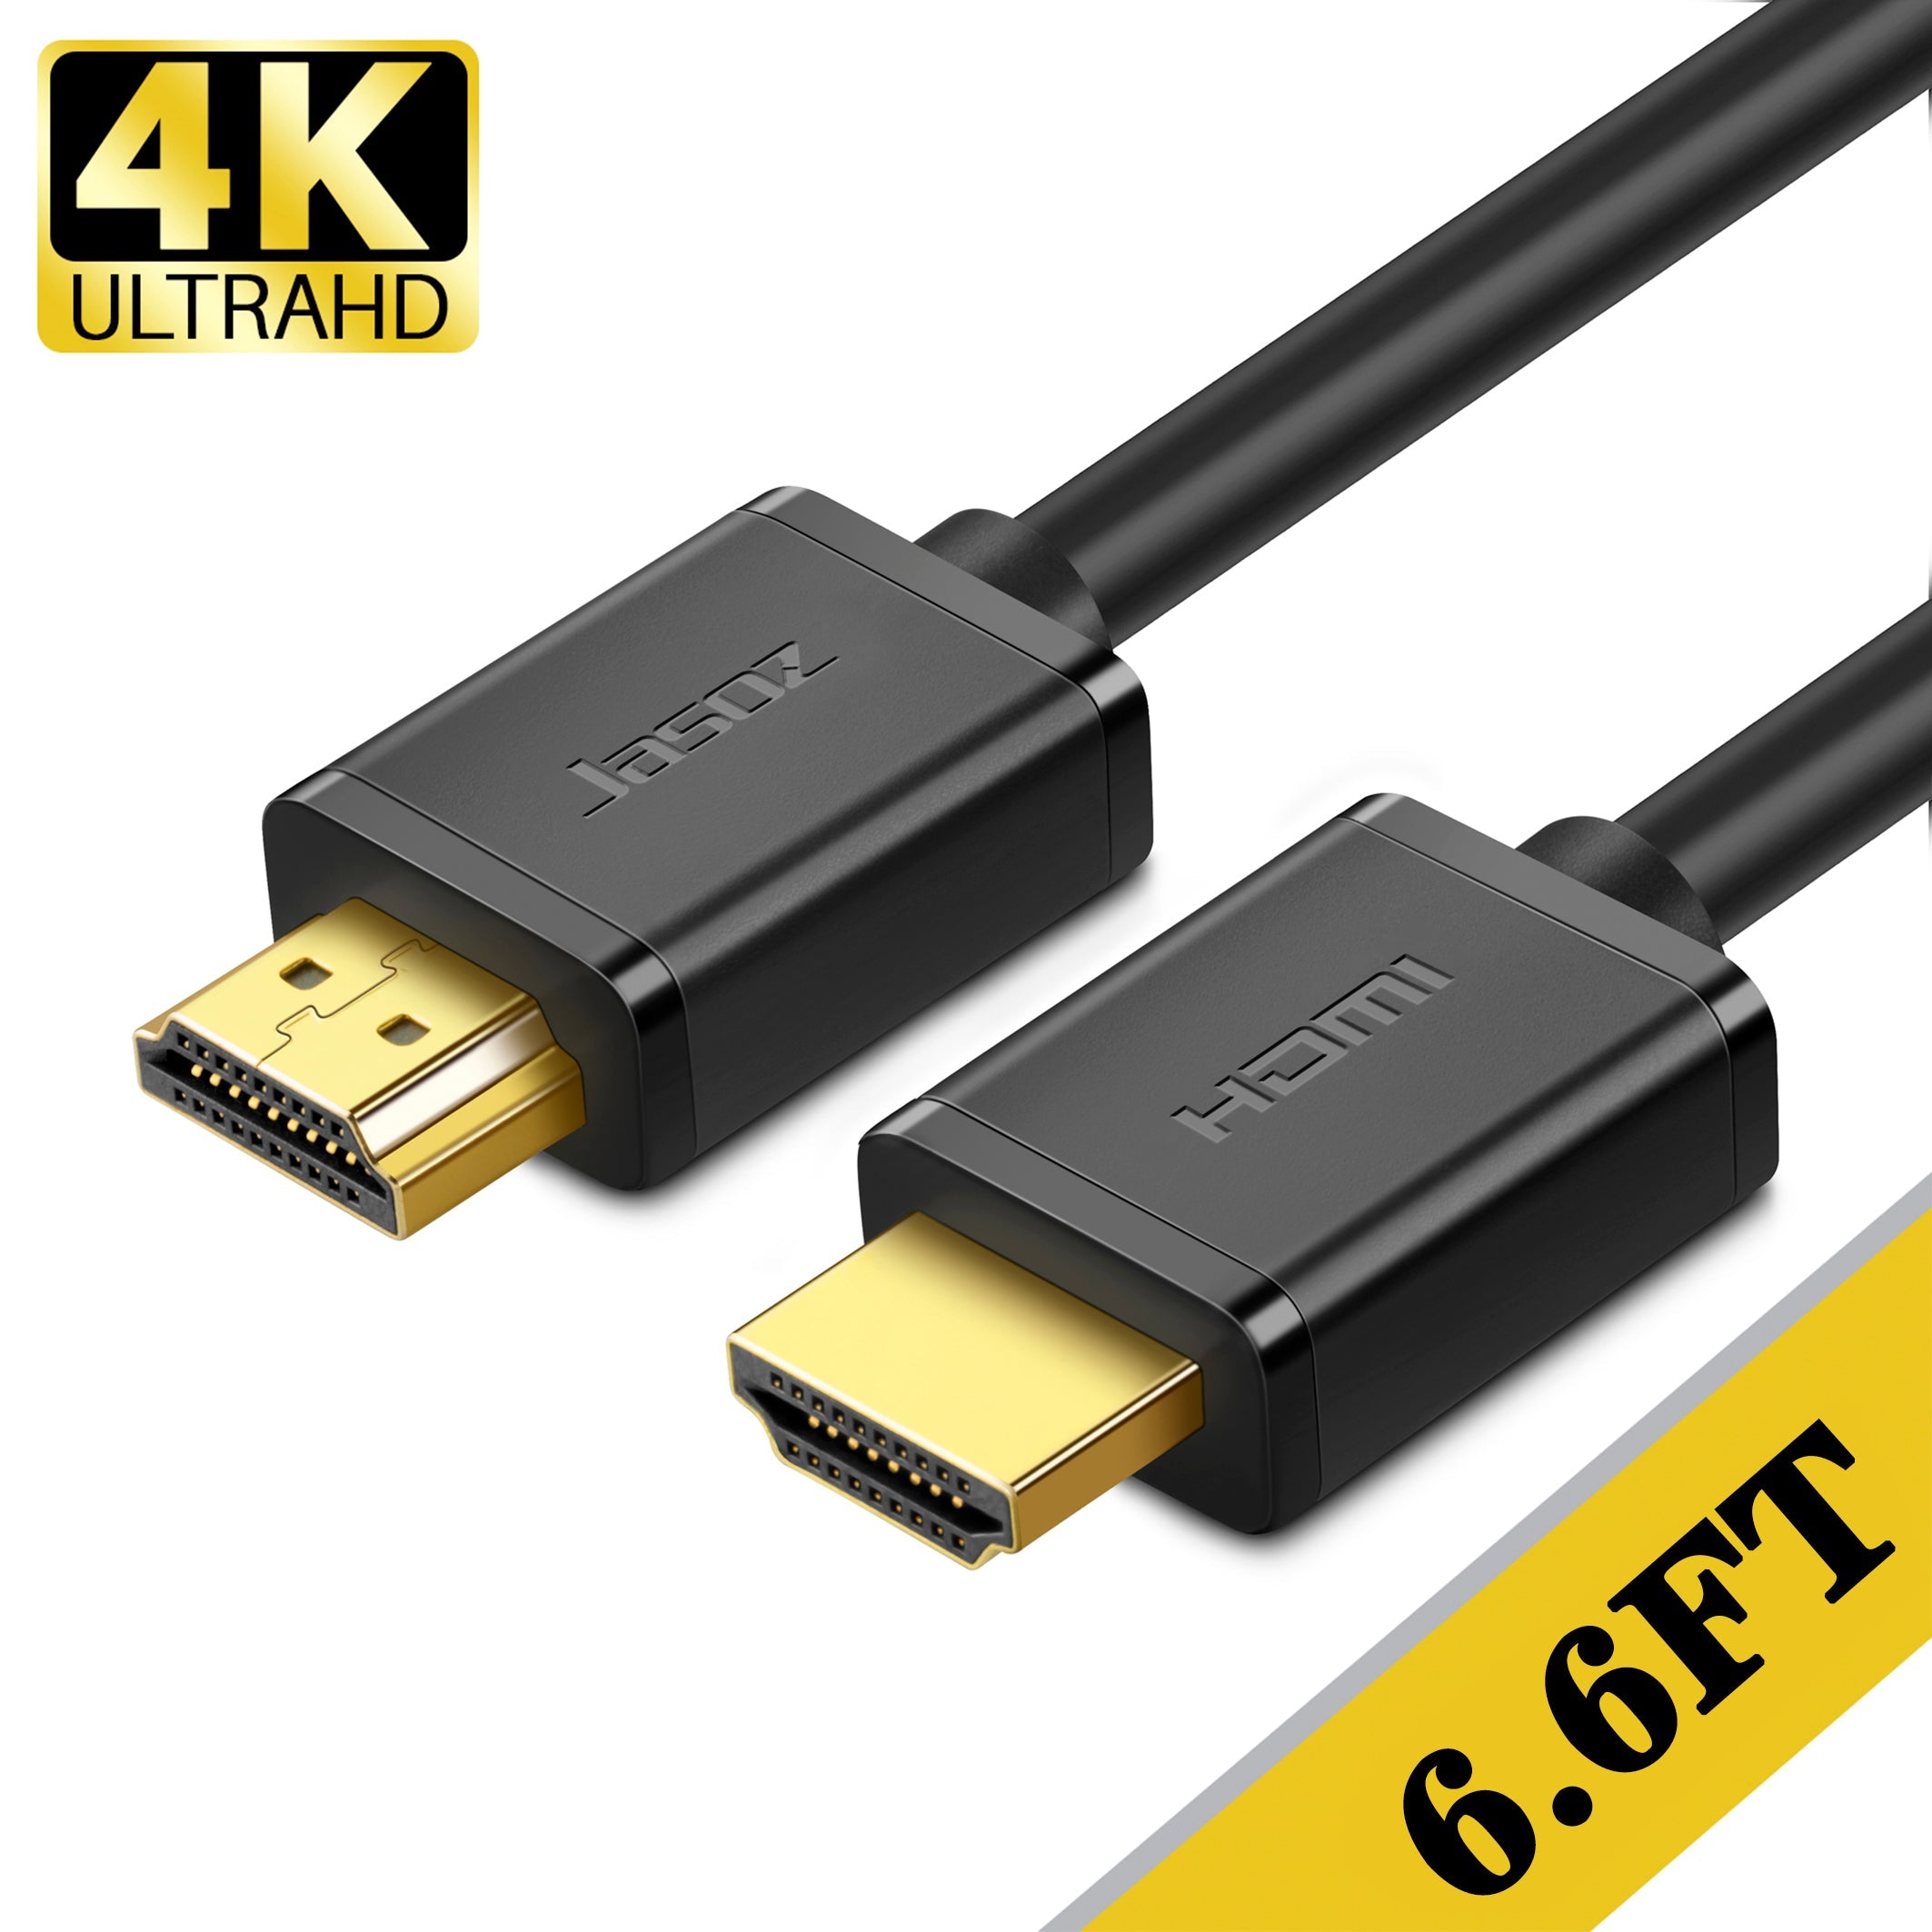 4K HDMI Cable 6.6ft, Gold-plated Connectors High Speed HDMI 2.0 – Skonyon